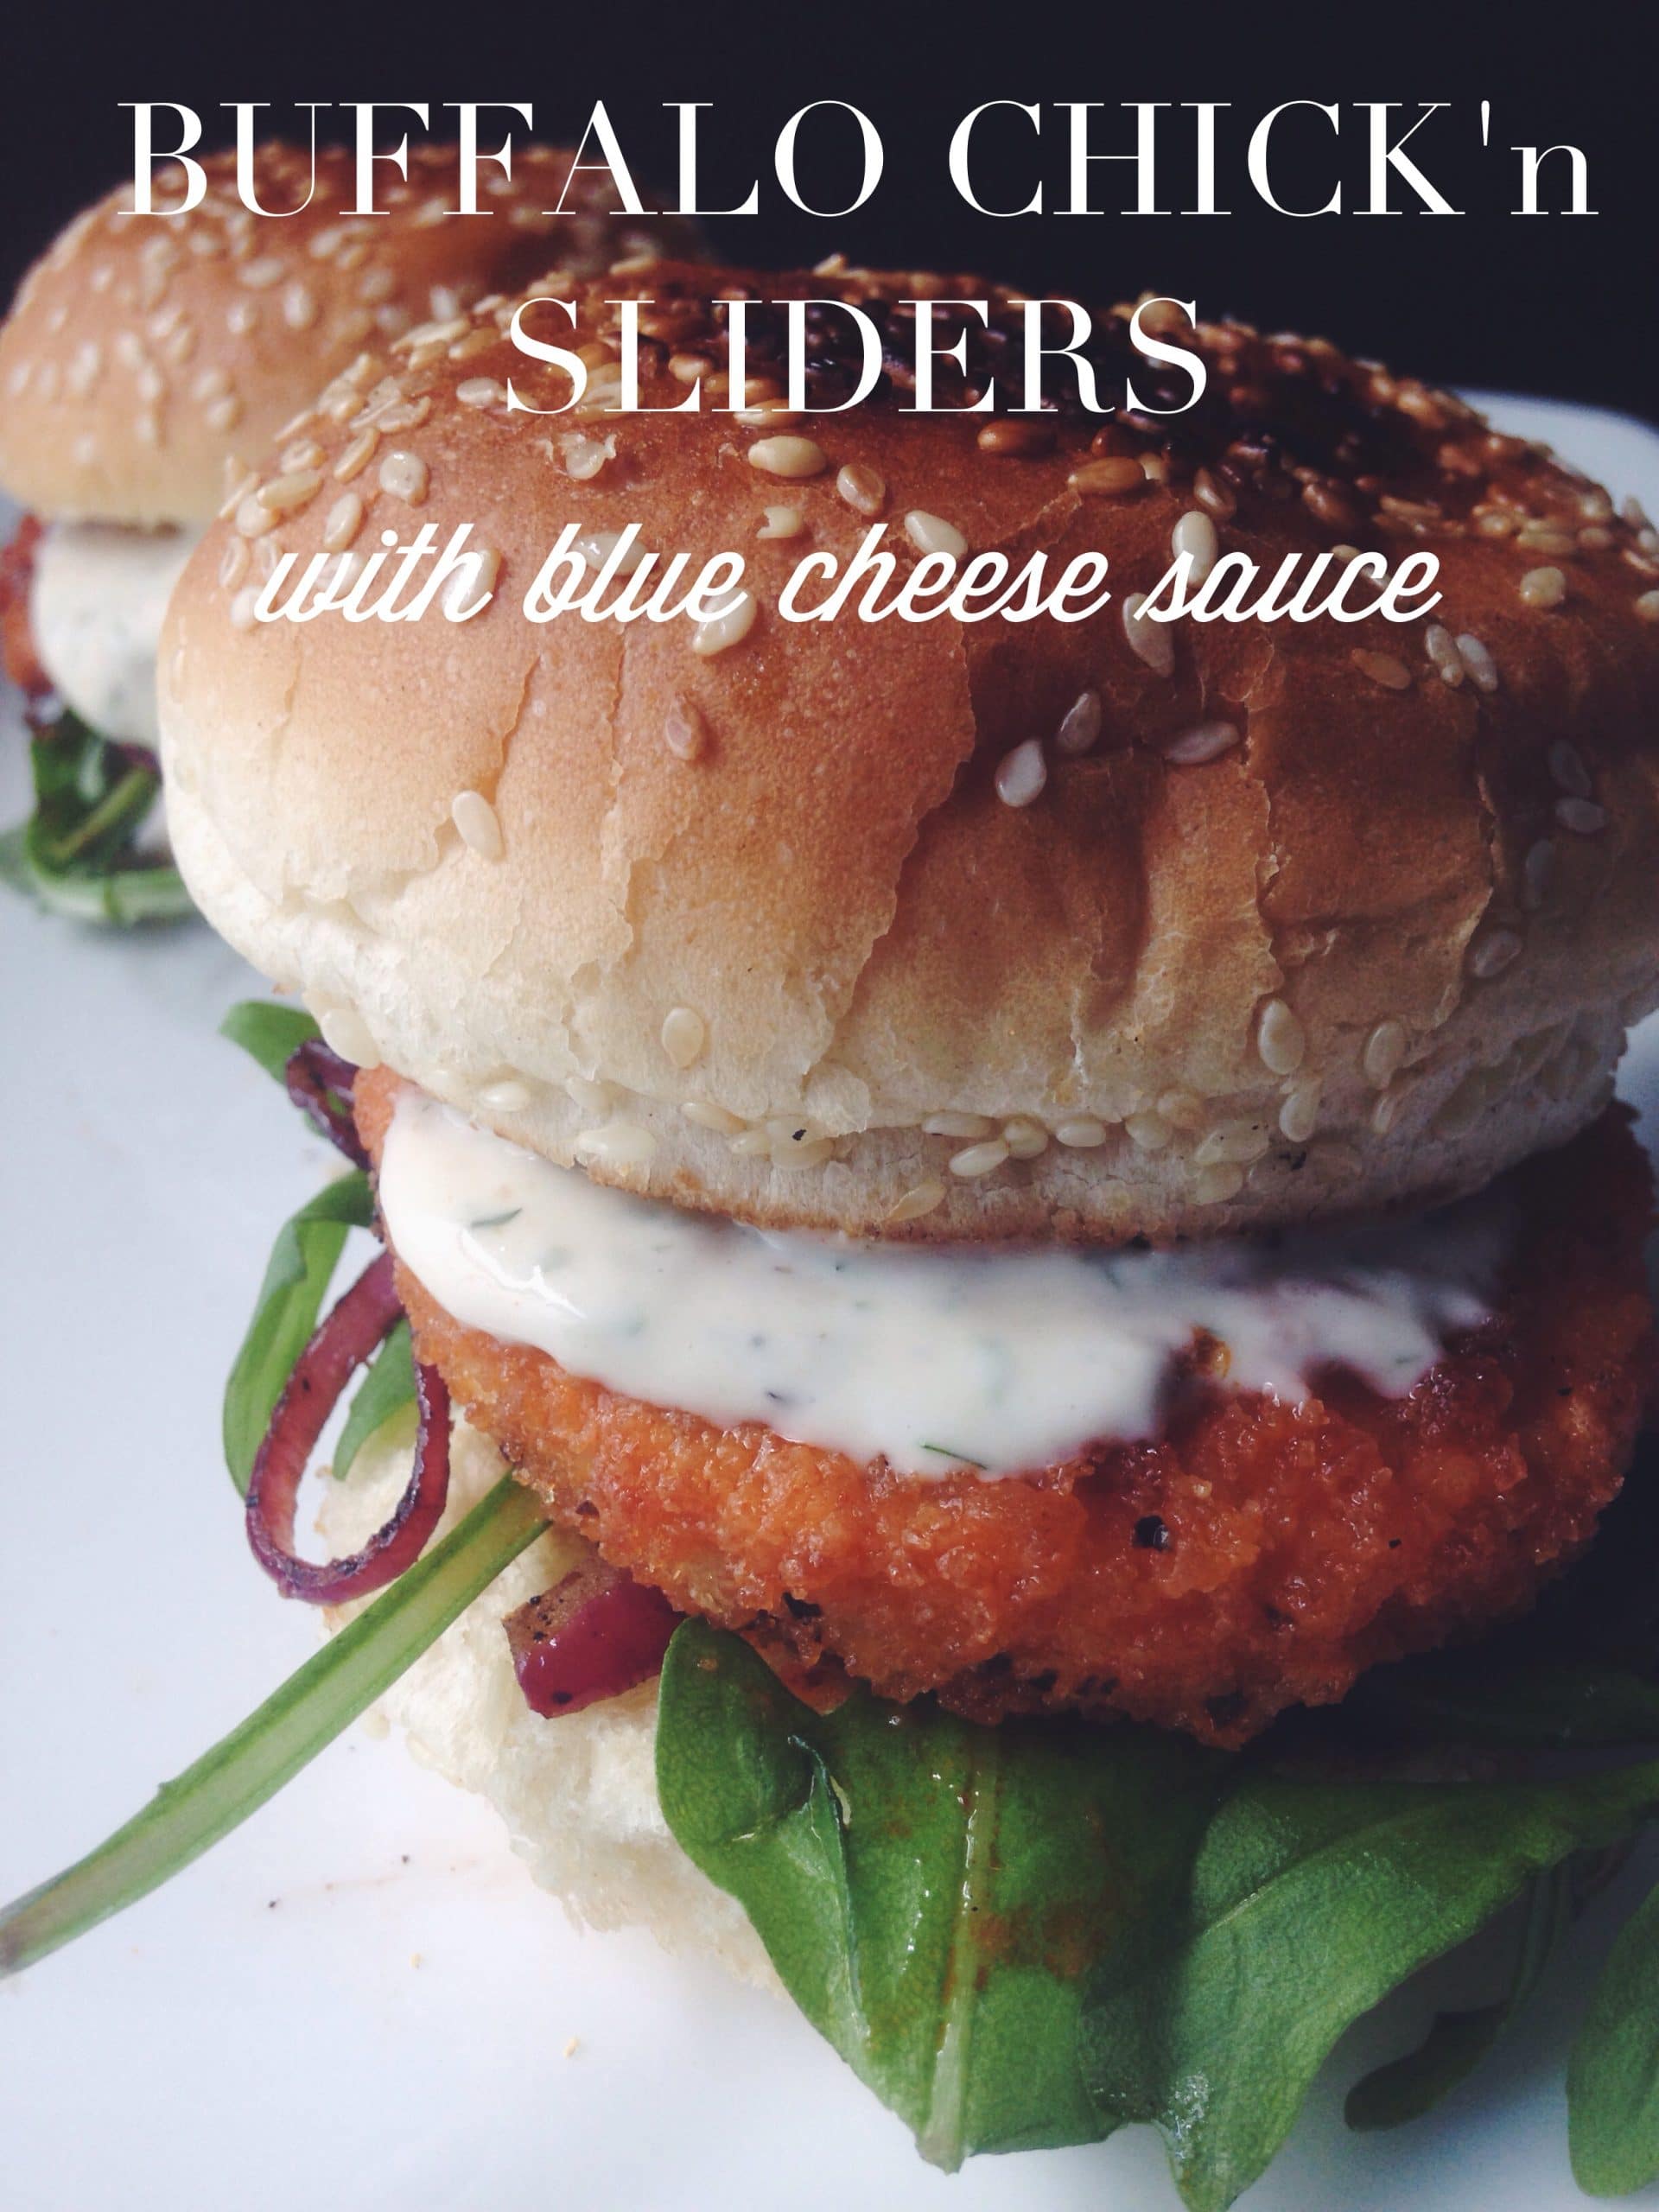 BUFFALO CHICK’n SLIDERS WITH BLUE CHEESE SAUCE | Cooking Goals